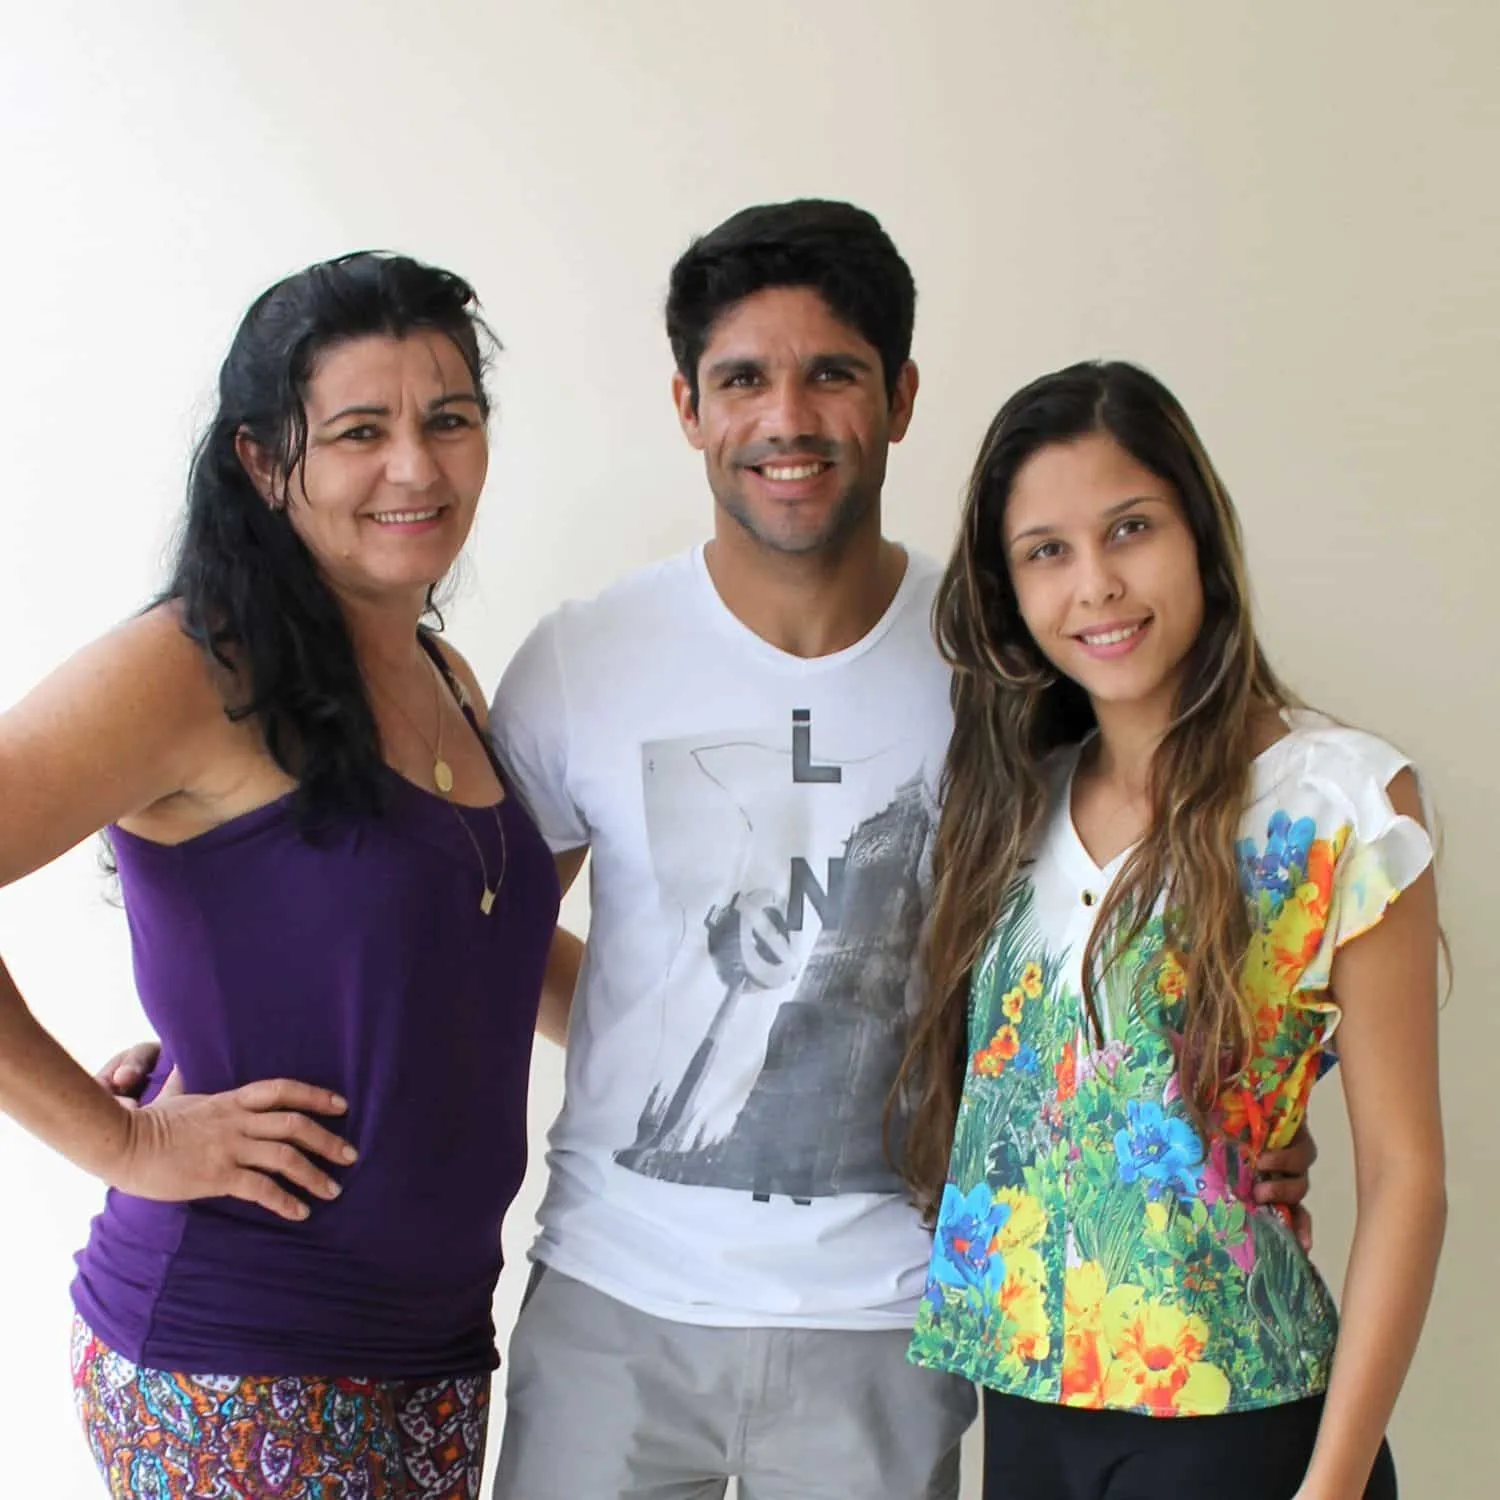 Diego Costa with mum, Joseleide (Left) and Sister, Barrister Talita (Right).